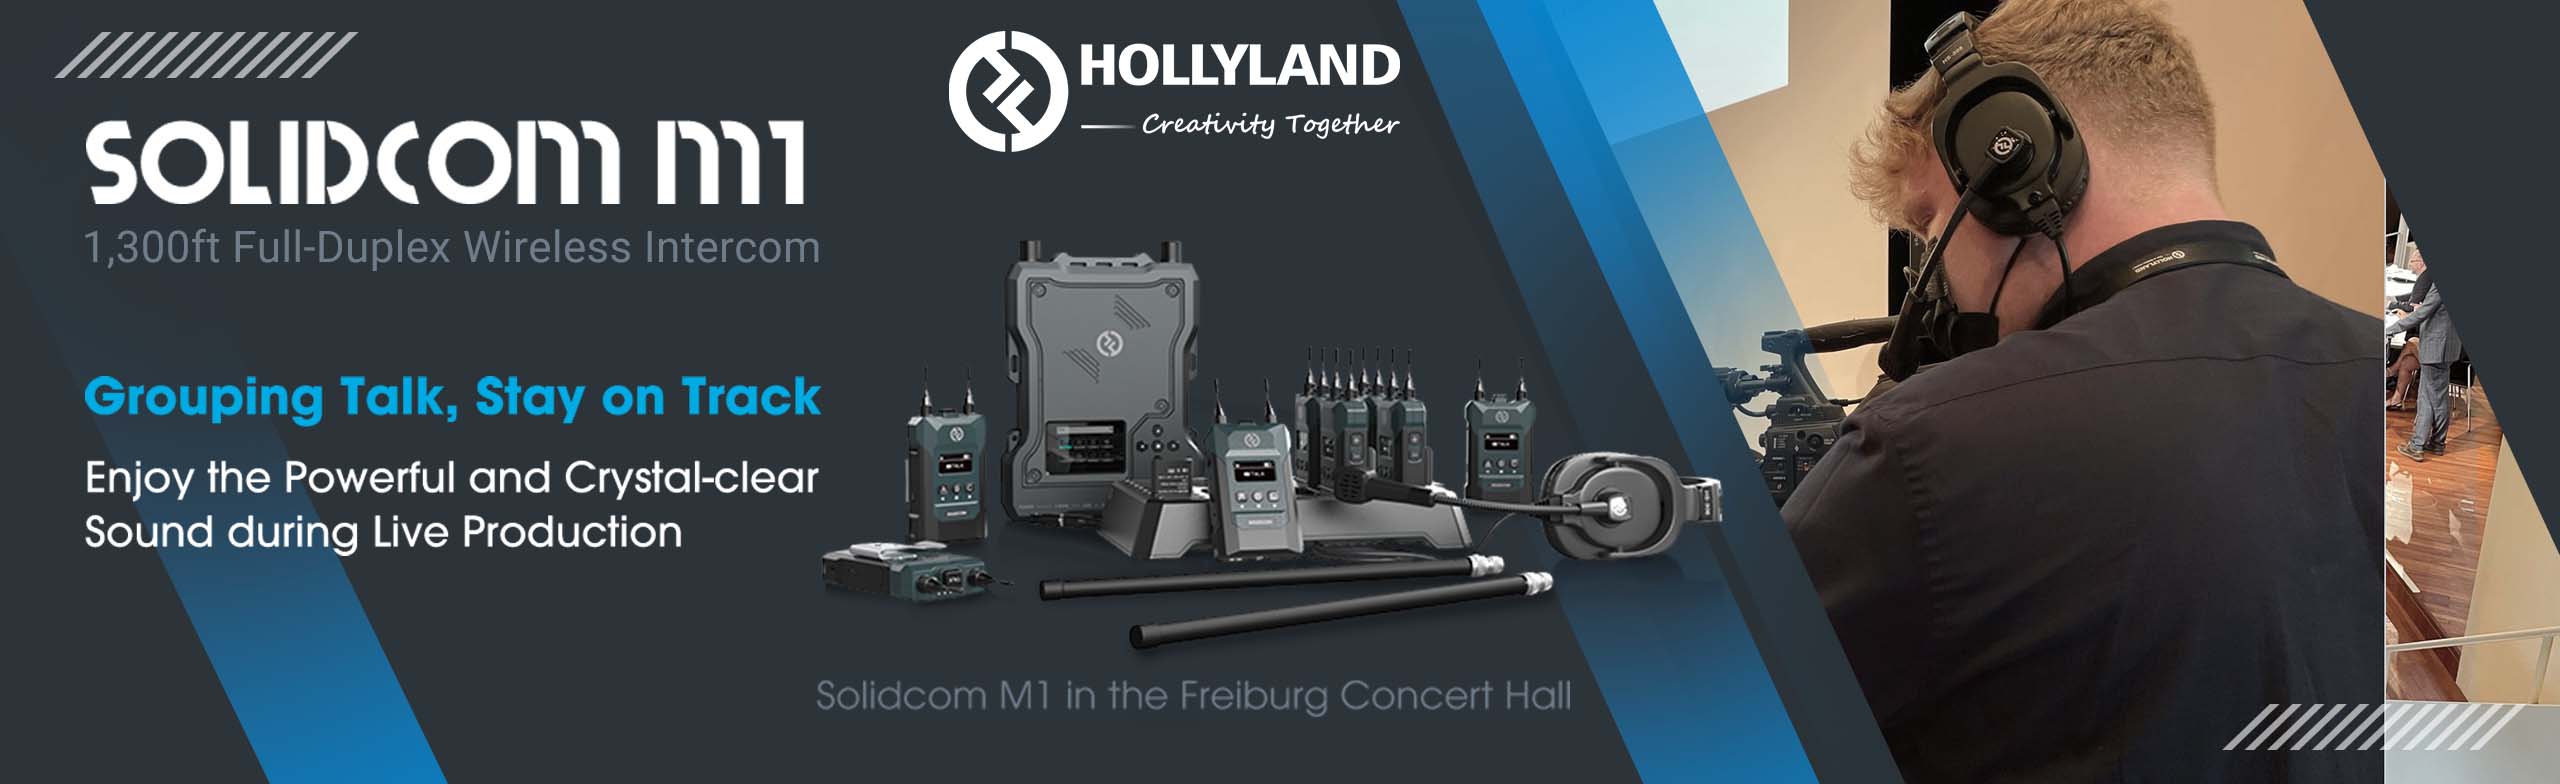 hollyland solidcom and C1 now from markertek